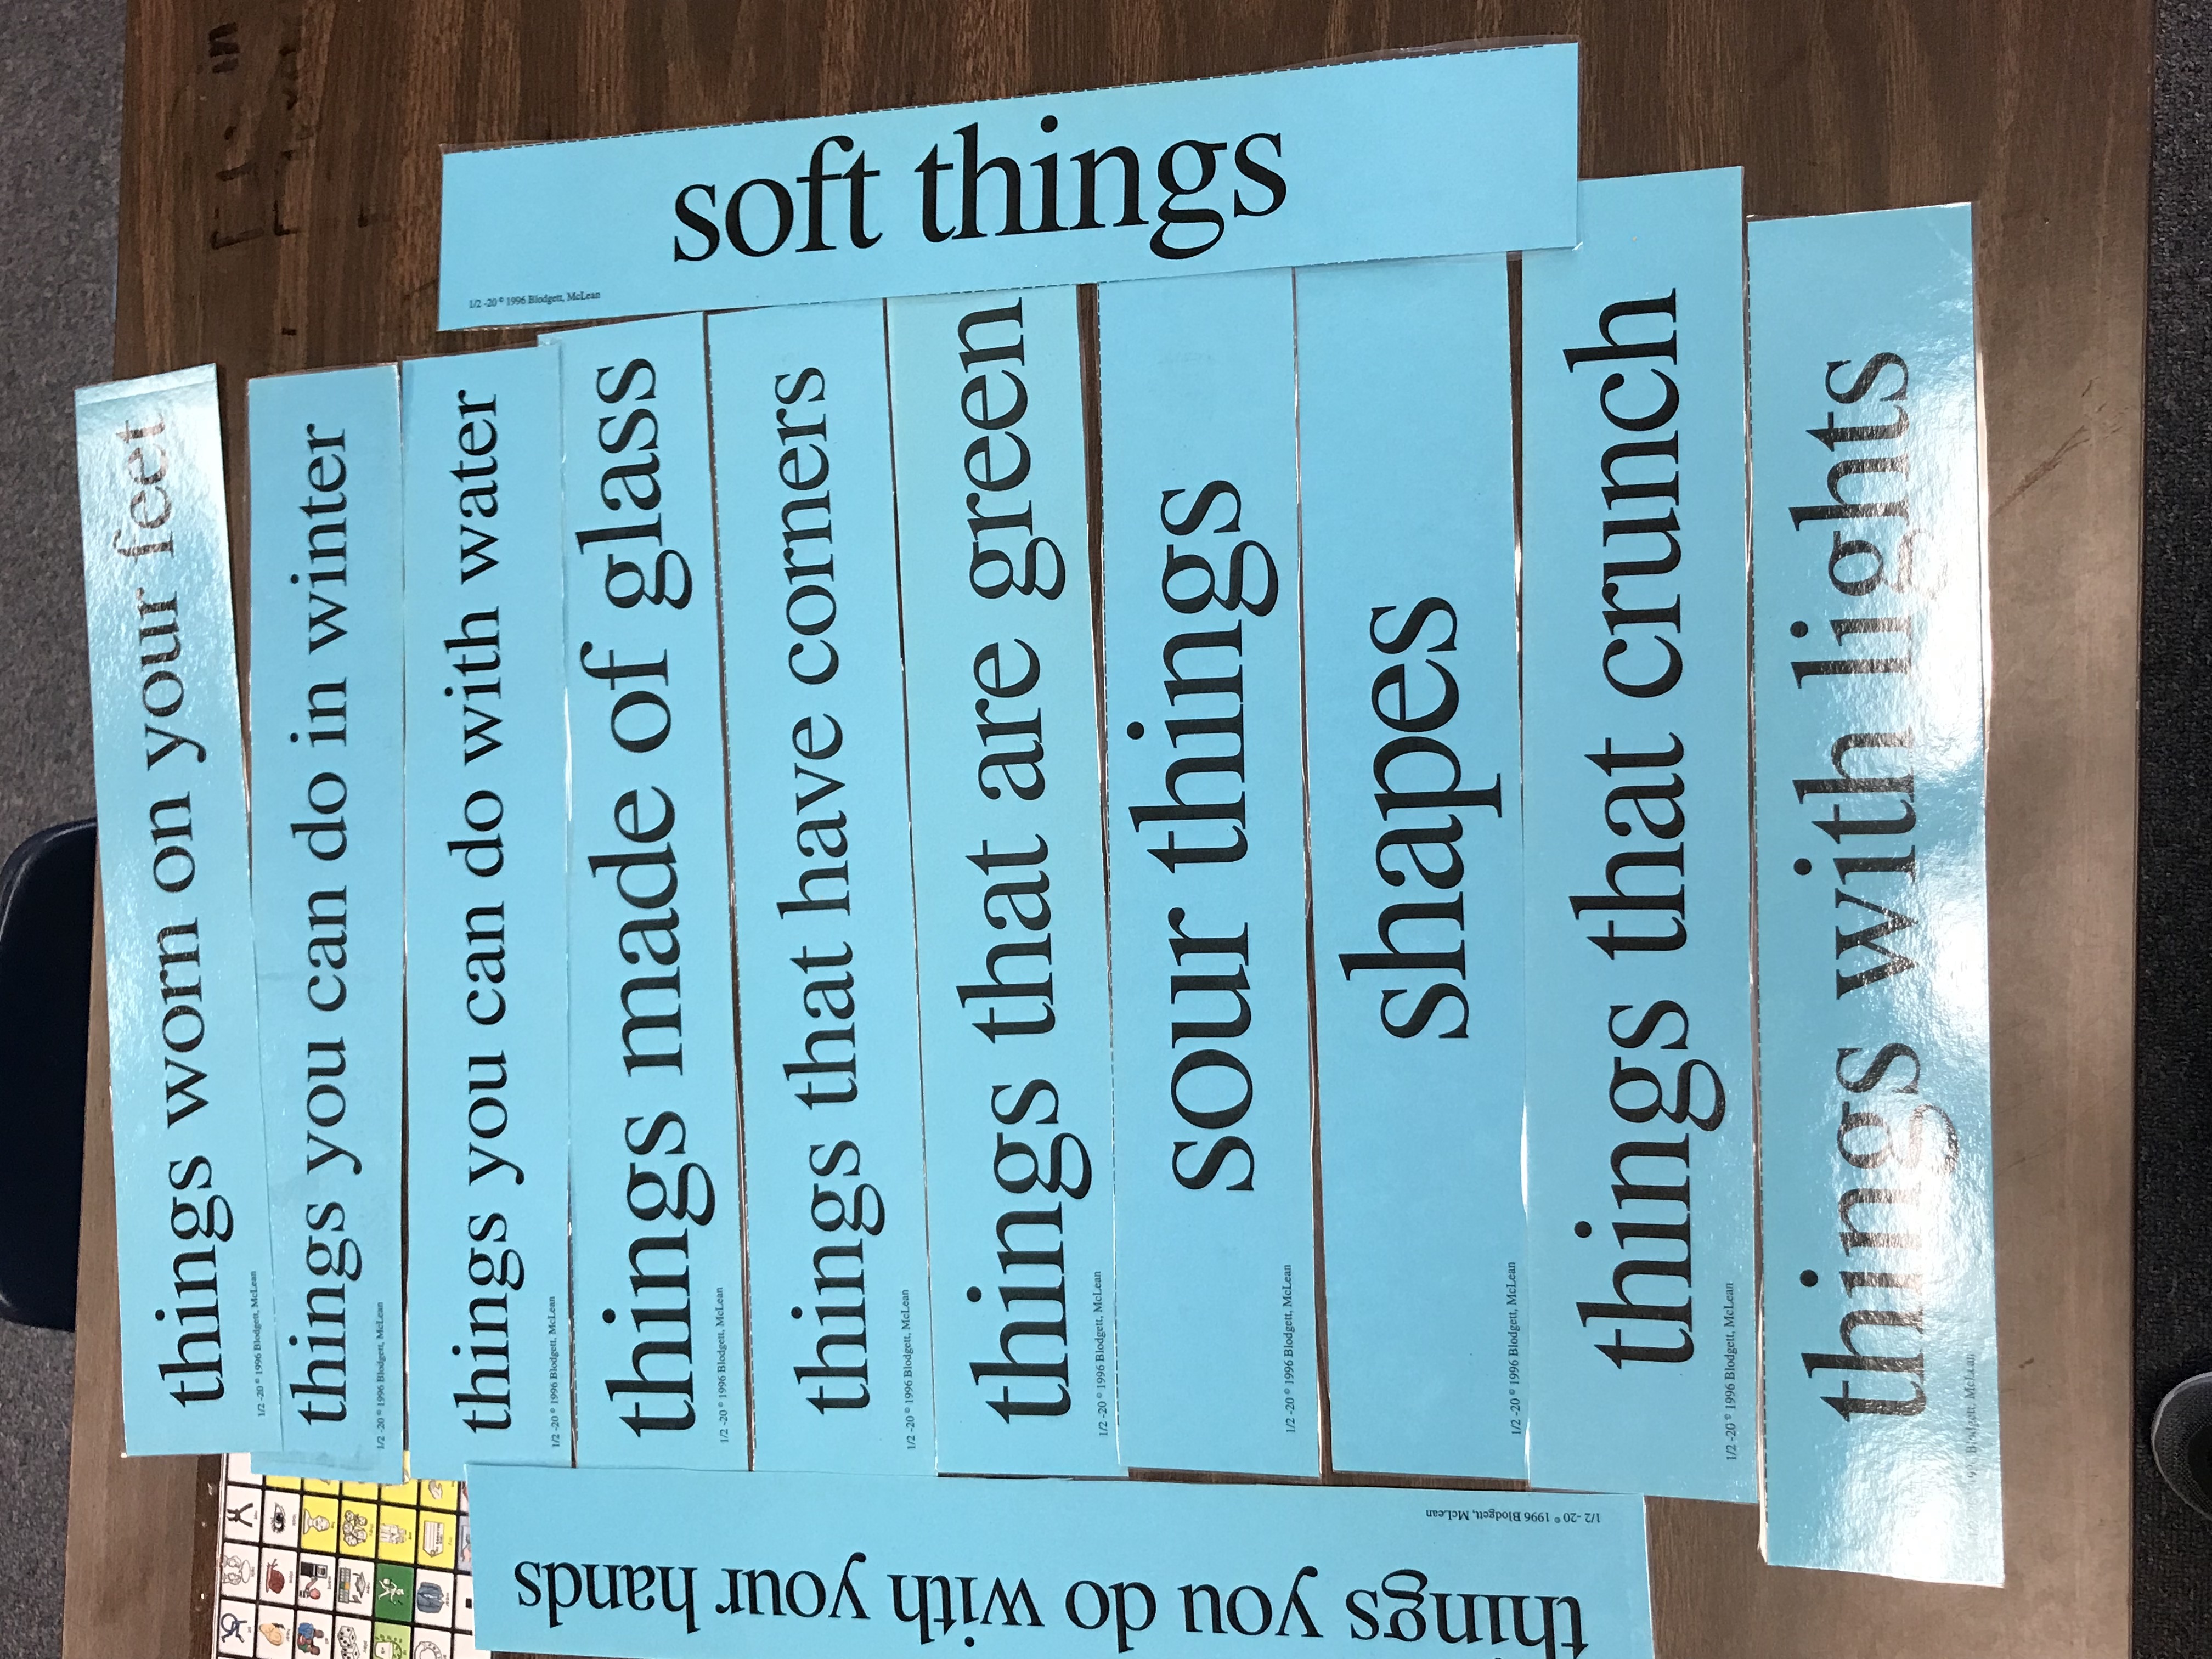 Laminated paper strips with words